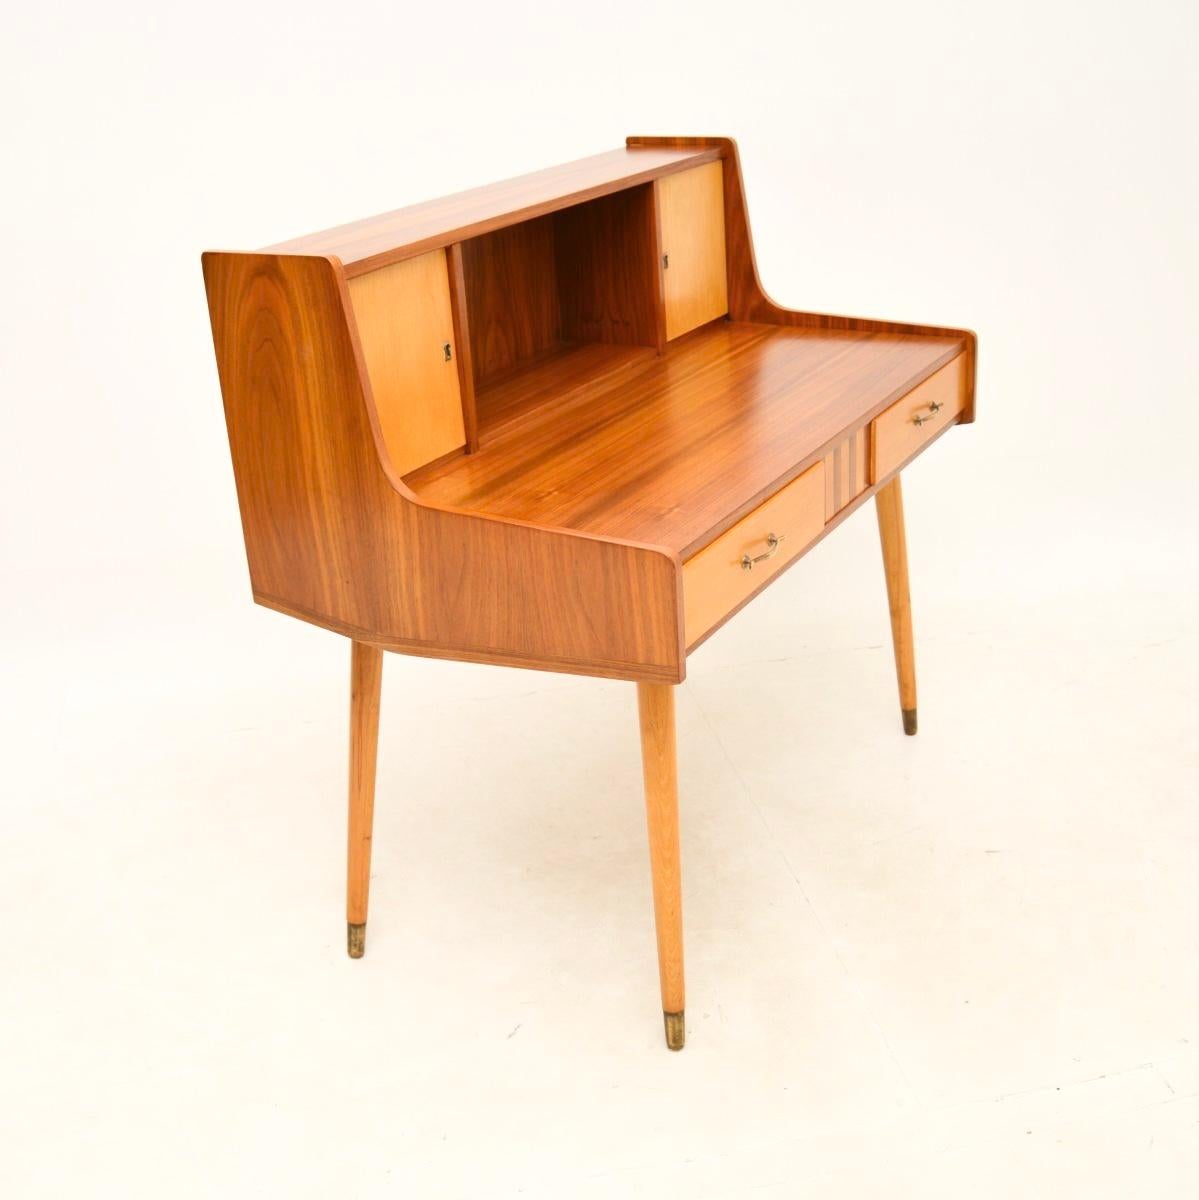 Vintage Italian Walnut and Satin Wood Desk In Good Condition For Sale In London, GB